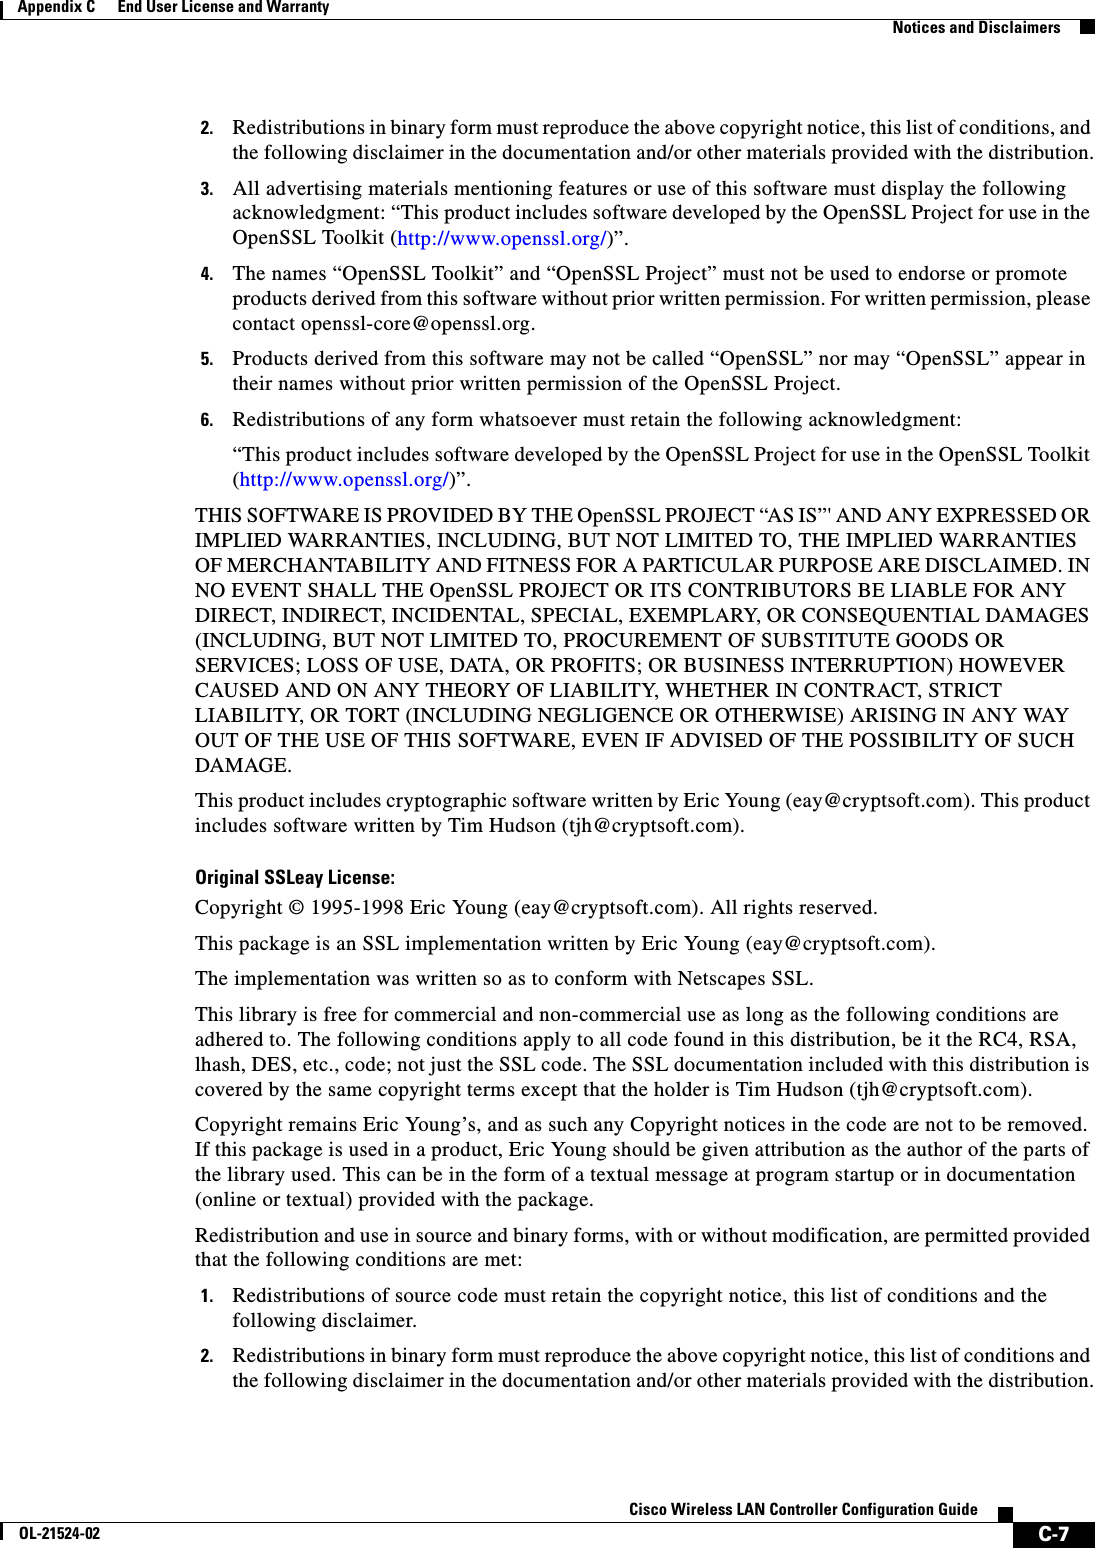  C-7Cisco Wireless LAN Controller Configuration GuideOL-21524-02Appendix C      End User License and Warranty  Notices and Disclaimers2. Redistributions in binary form must reproduce the above copyright notice, this list of conditions, and the following disclaimer in the documentation and/or other materials provided with the distribution.3. All advertising materials mentioning features or use of this software must display the following acknowledgment: “This product includes software developed by the OpenSSL Project for use in the OpenSSL Toolkit (http://www.openssl.org/)”.4. The names “OpenSSL Toolkit” and “OpenSSL Project” must not be used to endorse or promote products derived from this software without prior written permission. For written permission, please contact openssl-core@openssl.org.5. Products derived from this software may not be called “OpenSSL” nor may “OpenSSL” appear in their names without prior written permission of the OpenSSL Project.6. Redistributions of any form whatsoever must retain the following acknowledgment:“This product includes software developed by the OpenSSL Project for use in the OpenSSL Toolkit (http://www.openssl.org/)”.THIS SOFTWARE IS PROVIDED BY THE OpenSSL PROJECT “AS IS”&apos; AND ANY EXPRESSED OR IMPLIED WARRANTIES, INCLUDING, BUT NOT LIMITED TO, THE IMPLIED WARRANTIES OF MERCHANTABILITY AND FITNESS FOR A PARTICULAR PURPOSE ARE DISCLAIMED. IN NO EVENT SHALL THE OpenSSL PROJECT OR ITS CONTRIBUTORS BE LIABLE FOR ANY DIRECT, INDIRECT, INCIDENTAL, SPECIAL, EXEMPLARY, OR CONSEQUENTIAL DAMAGES (INCLUDING, BUT NOT LIMITED TO, PROCUREMENT OF SUBSTITUTE GOODS OR SERVICES; LOSS OF USE, DATA, OR PROFITS; OR BUSINESS INTERRUPTION) HOWEVER CAUSED AND ON ANY THEORY OF LIABILITY, WHETHER IN CONTRACT, STRICT LIABILITY, OR TORT (INCLUDING NEGLIGENCE OR OTHERWISE) ARISING IN ANY WAY OUT OF THE USE OF THIS SOFTWARE, EVEN IF ADVISED OF THE POSSIBILITY OF SUCH DAMAGE.This product includes cryptographic software written by Eric Young (eay@cryptsoft.com). This product includes software written by Tim Hudson (tjh@cryptsoft.com).Original SSLeay License:Copyright © 1995-1998 Eric Young (eay@cryptsoft.com). All rights reserved.This package is an SSL implementation written by Eric Young (eay@cryptsoft.com).The implementation was written so as to conform with Netscapes SSL.This library is free for commercial and non-commercial use as long as the following conditions are adhered to. The following conditions apply to all code found in this distribution, be it the RC4, RSA, lhash, DES, etc., code; not just the SSL code. The SSL documentation included with this distribution is covered by the same copyright terms except that the holder is Tim Hudson (tjh@cryptsoft.com).Copyright remains Eric Young’s, and as such any Copyright notices in the code are not to be removed. If this package is used in a product, Eric Young should be given attribution as the author of the parts of the library used. This can be in the form of a textual message at program startup or in documentation (online or textual) provided with the package.Redistribution and use in source and binary forms, with or without modification, are permitted provided that the following conditions are met:1. Redistributions of source code must retain the copyright notice, this list of conditions and the following disclaimer.2. Redistributions in binary form must reproduce the above copyright notice, this list of conditions and the following disclaimer in the documentation and/or other materials provided with the distribution.